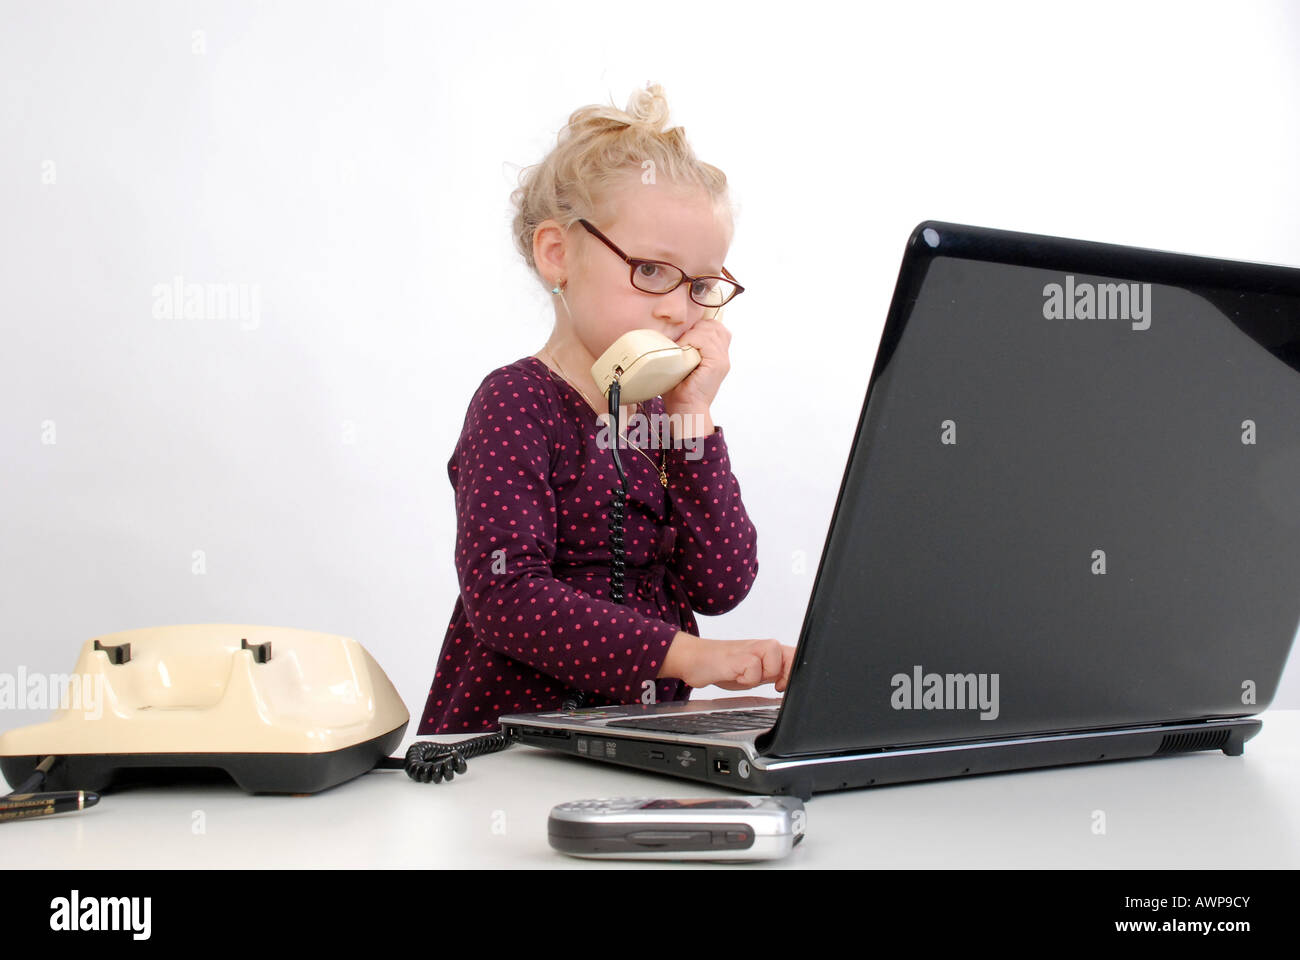 child and computer Stock Photo